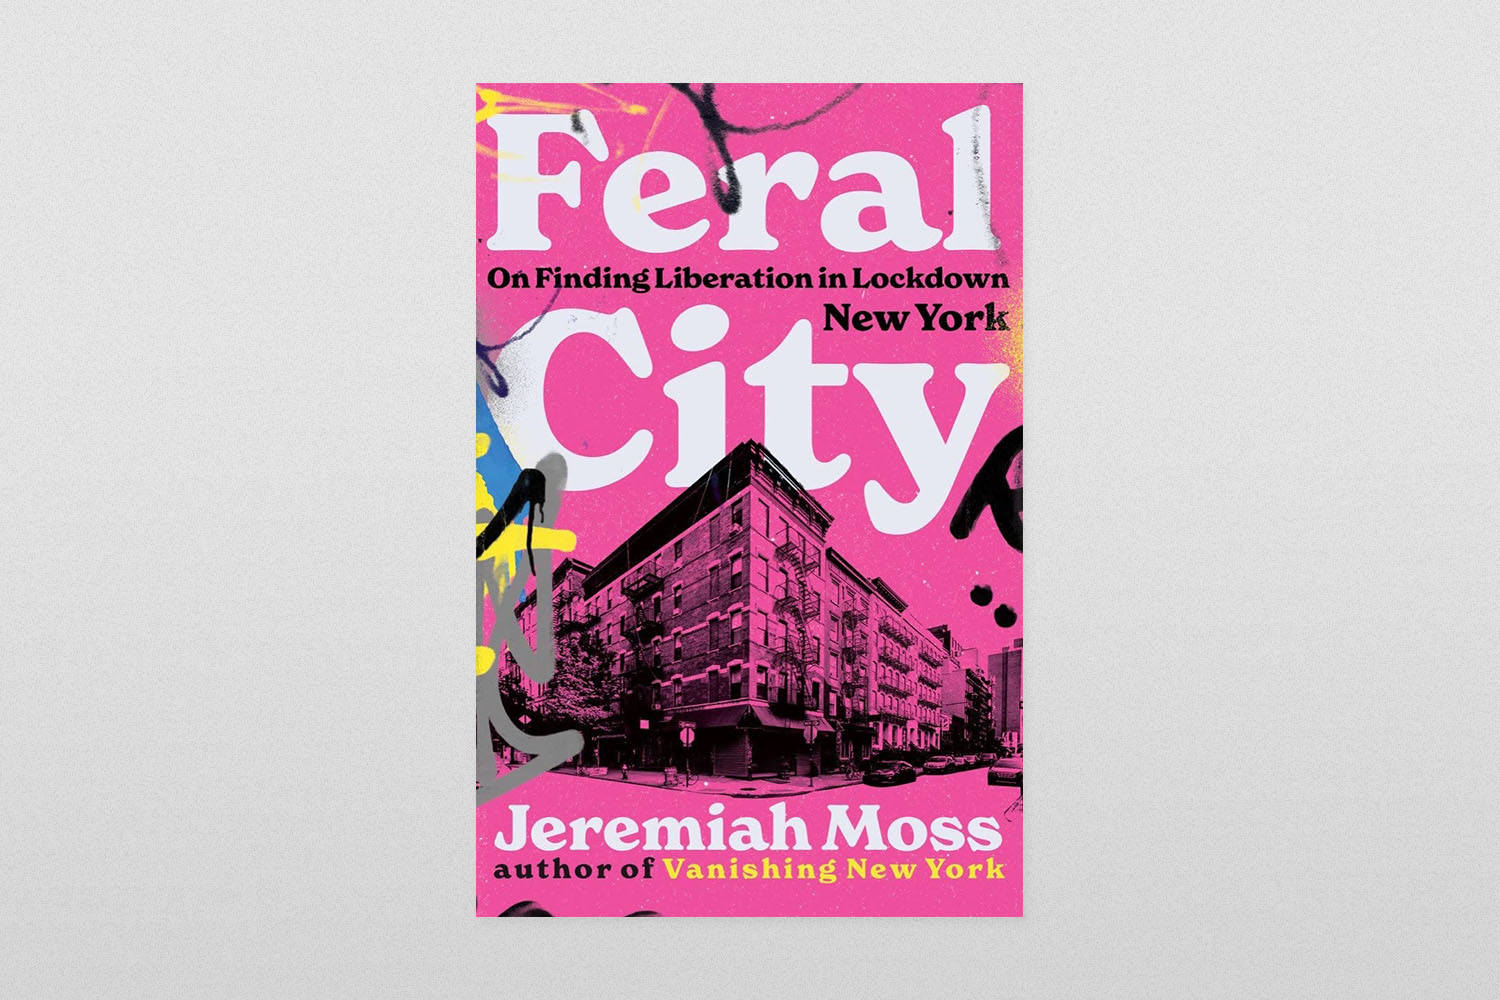 Feral City- On Finding Liberation in Lockdown New York